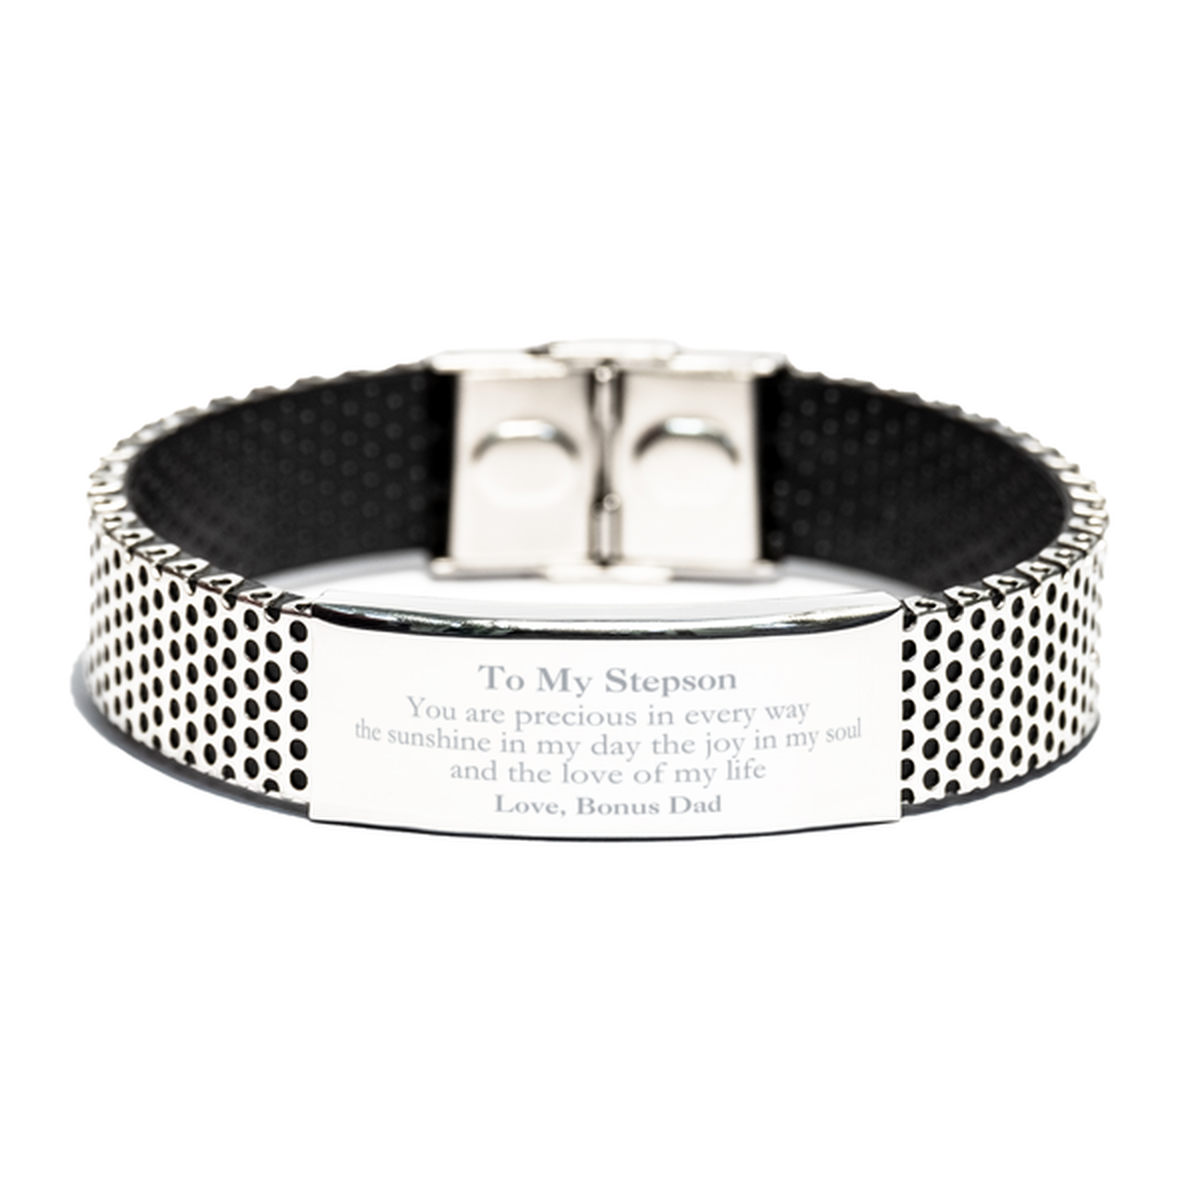 Graduation Gifts for Stepson Stainless Steel Bracelet Present from Bonus Dad, Christmas Stepson Birthday Gifts Stepson You are precious in every way the sunshine in my day. Love, Bonus Dad